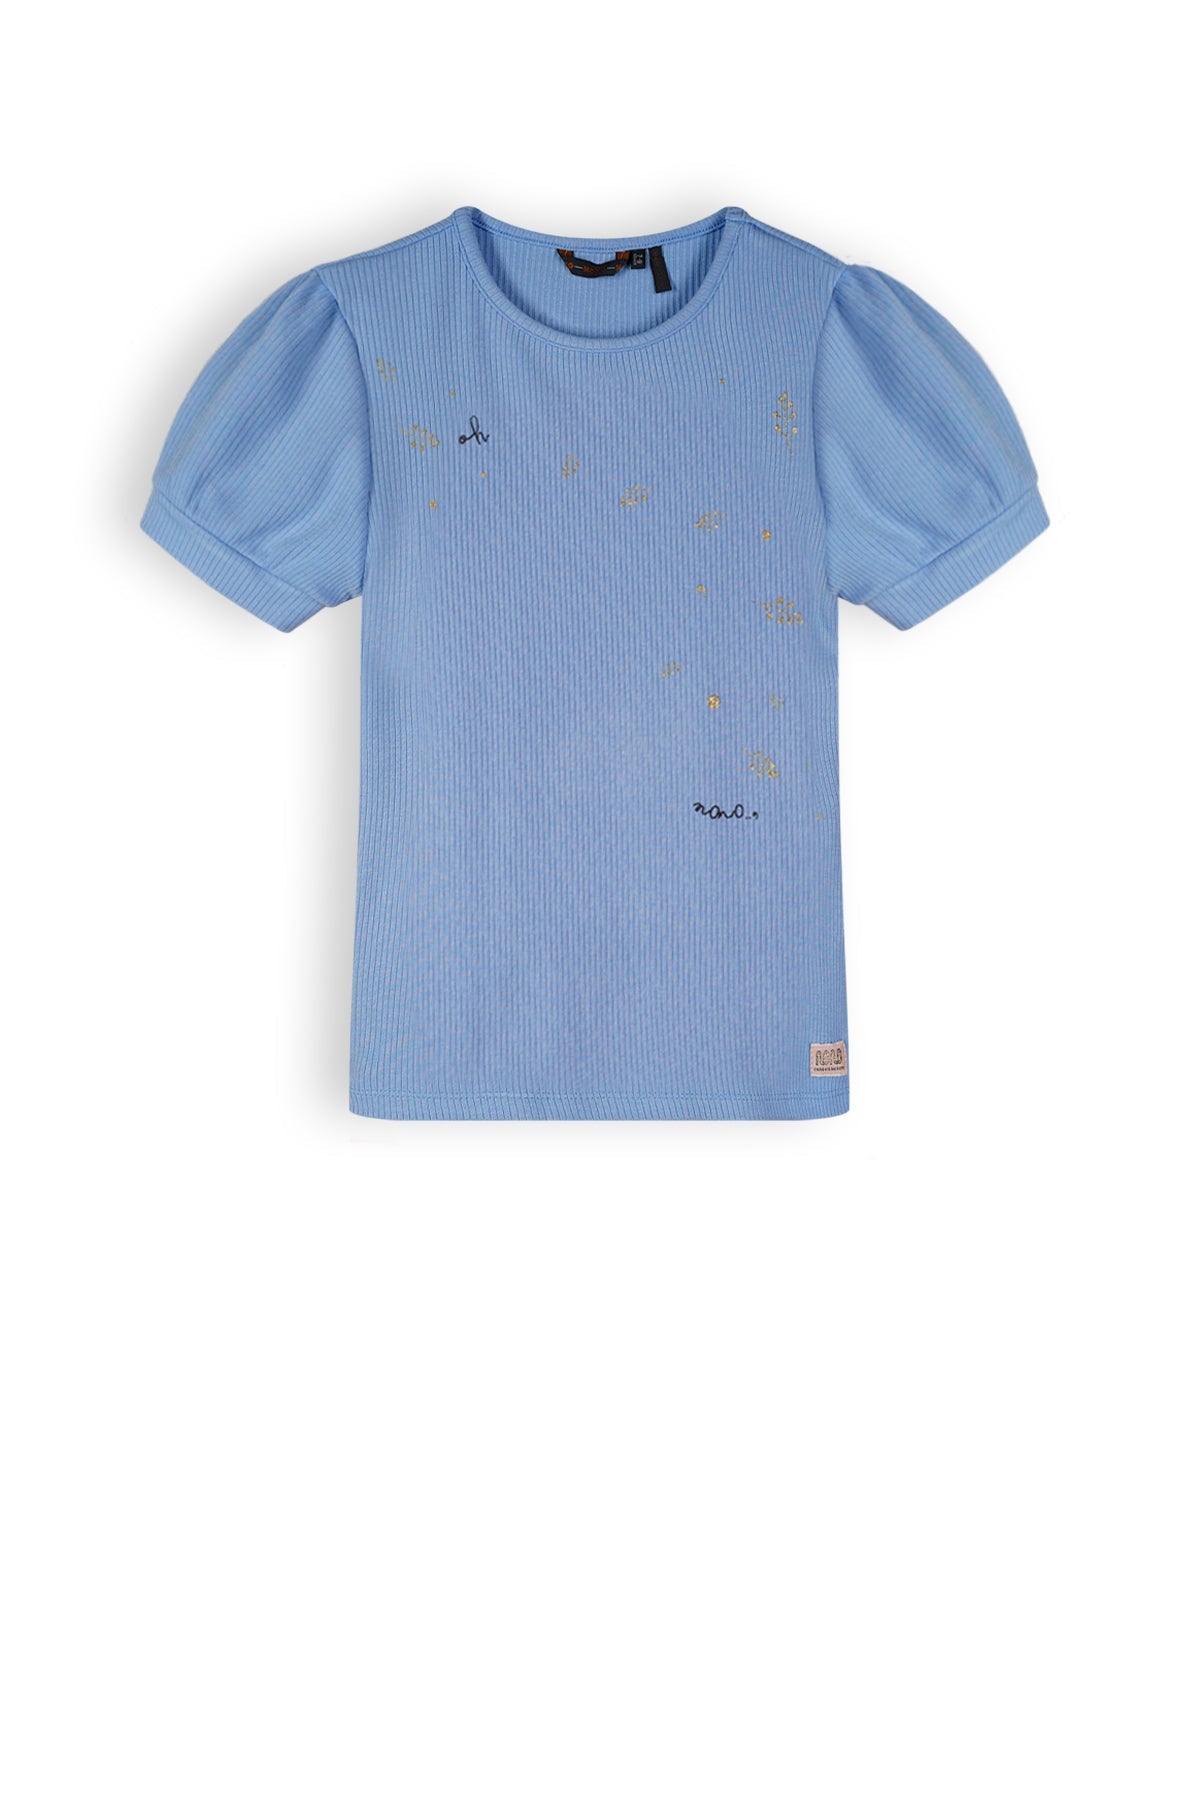 Meisjes Kyoto Girls Rib Tshirt S/Sl With Refined Artwork At Chest van NoNo in de kleur Provence Blue in maat 134-140.